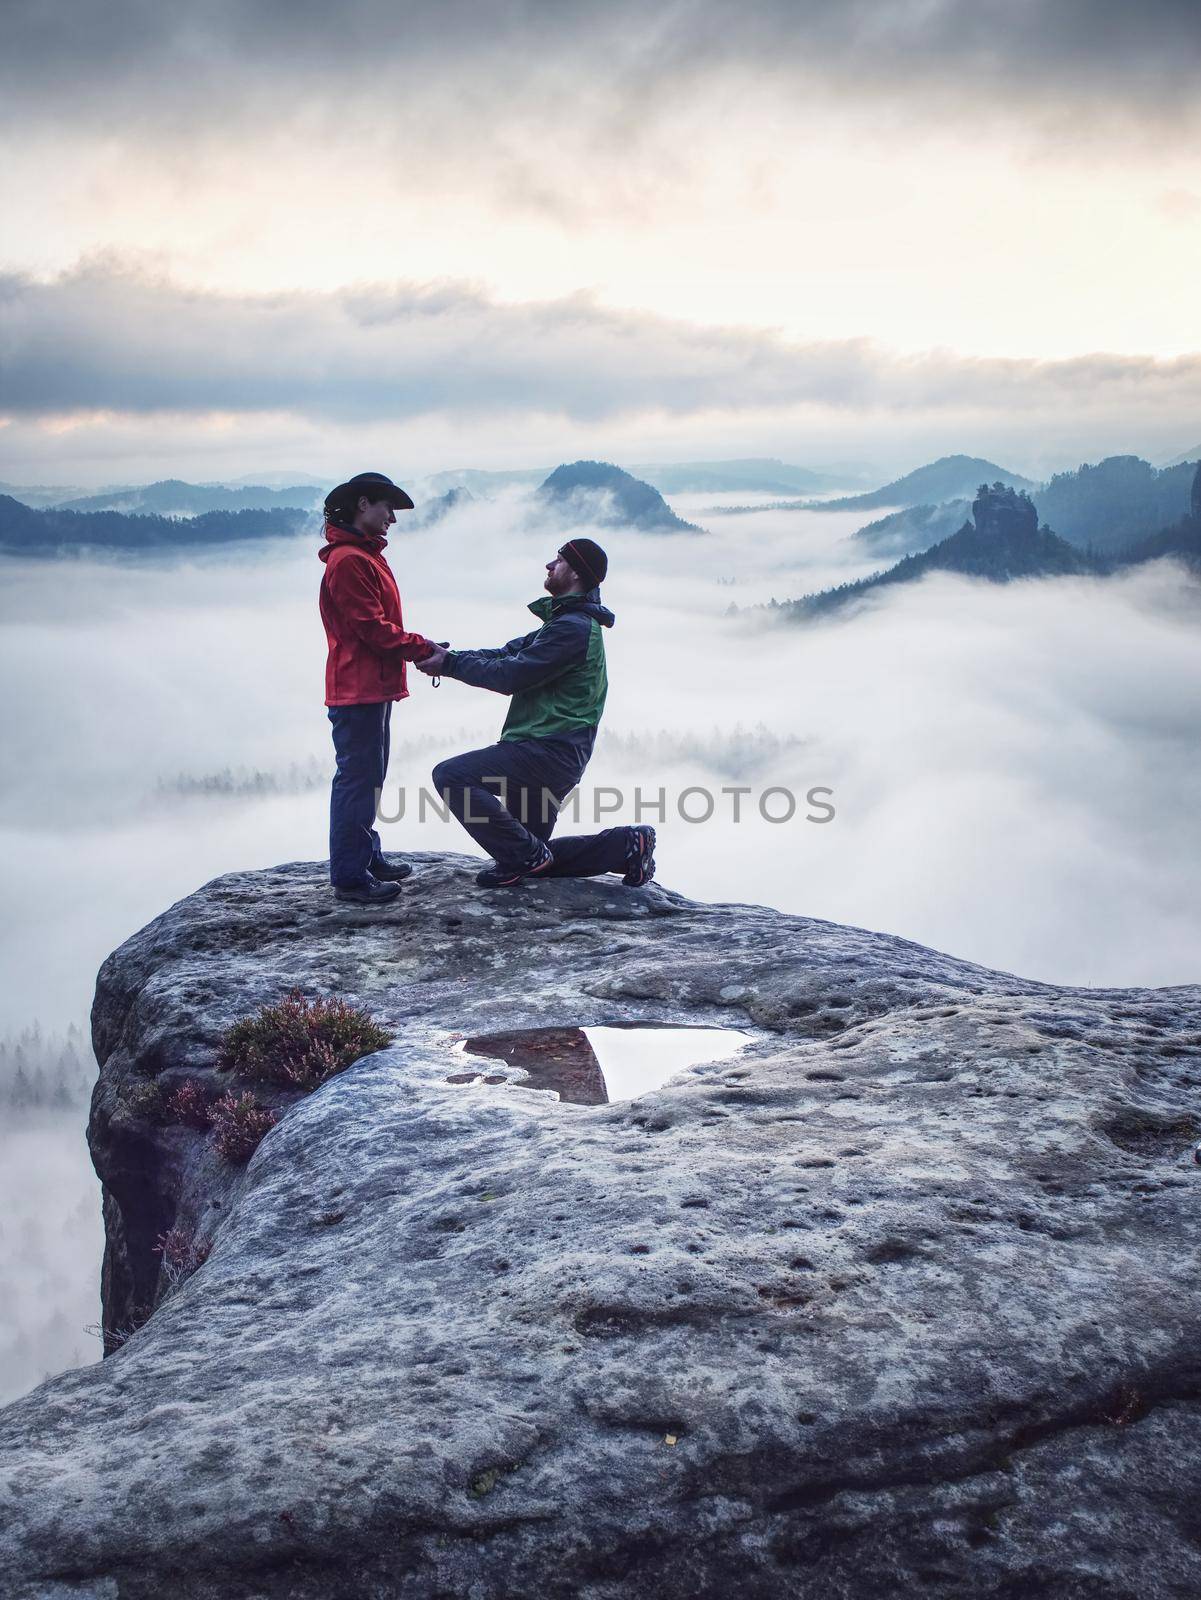 Lover women and men travel together and relax on mountain by rdonar2